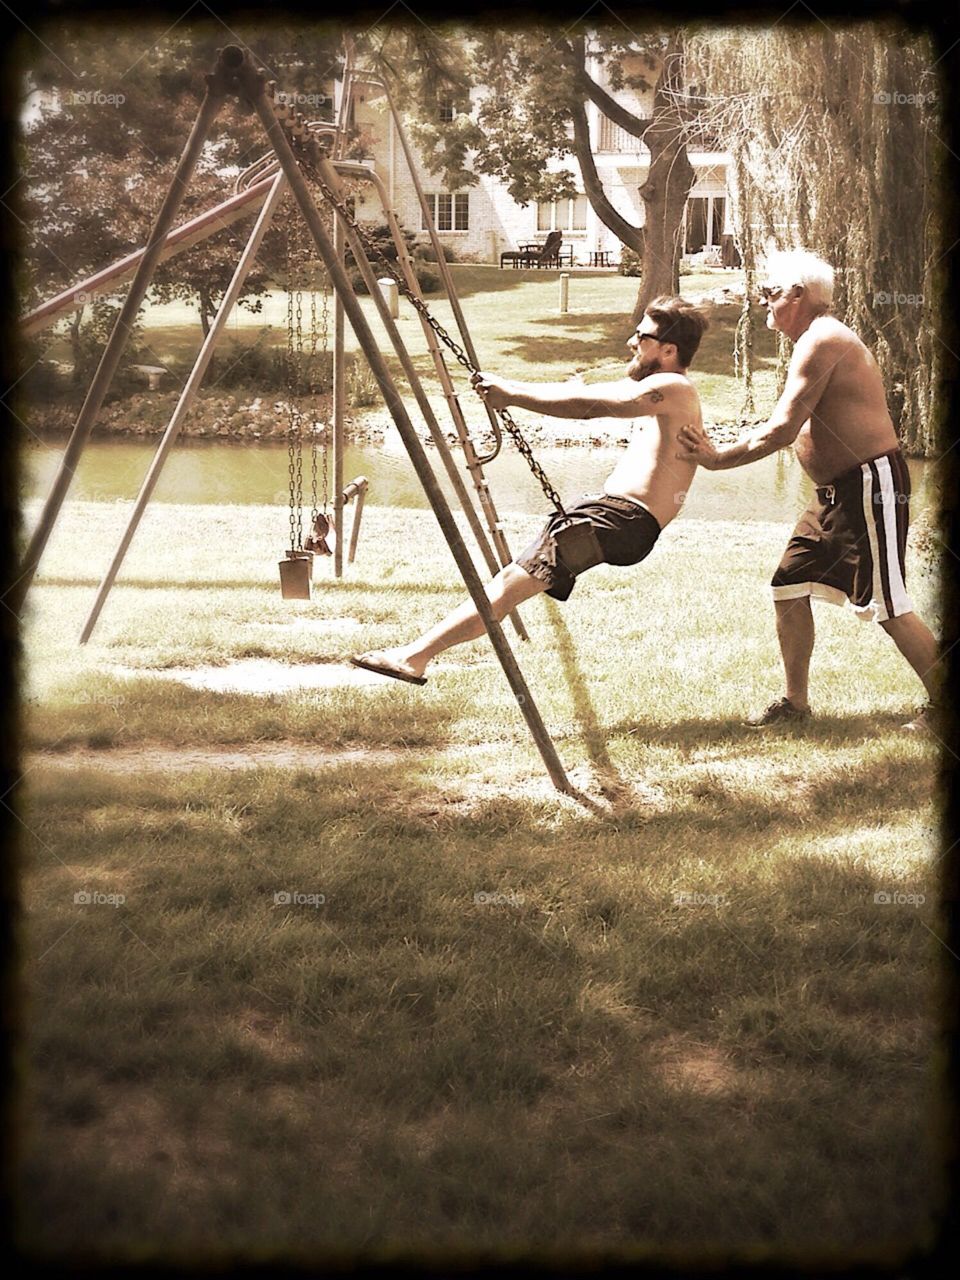 Dad remember when I was 30 and you pushed me on the swing?